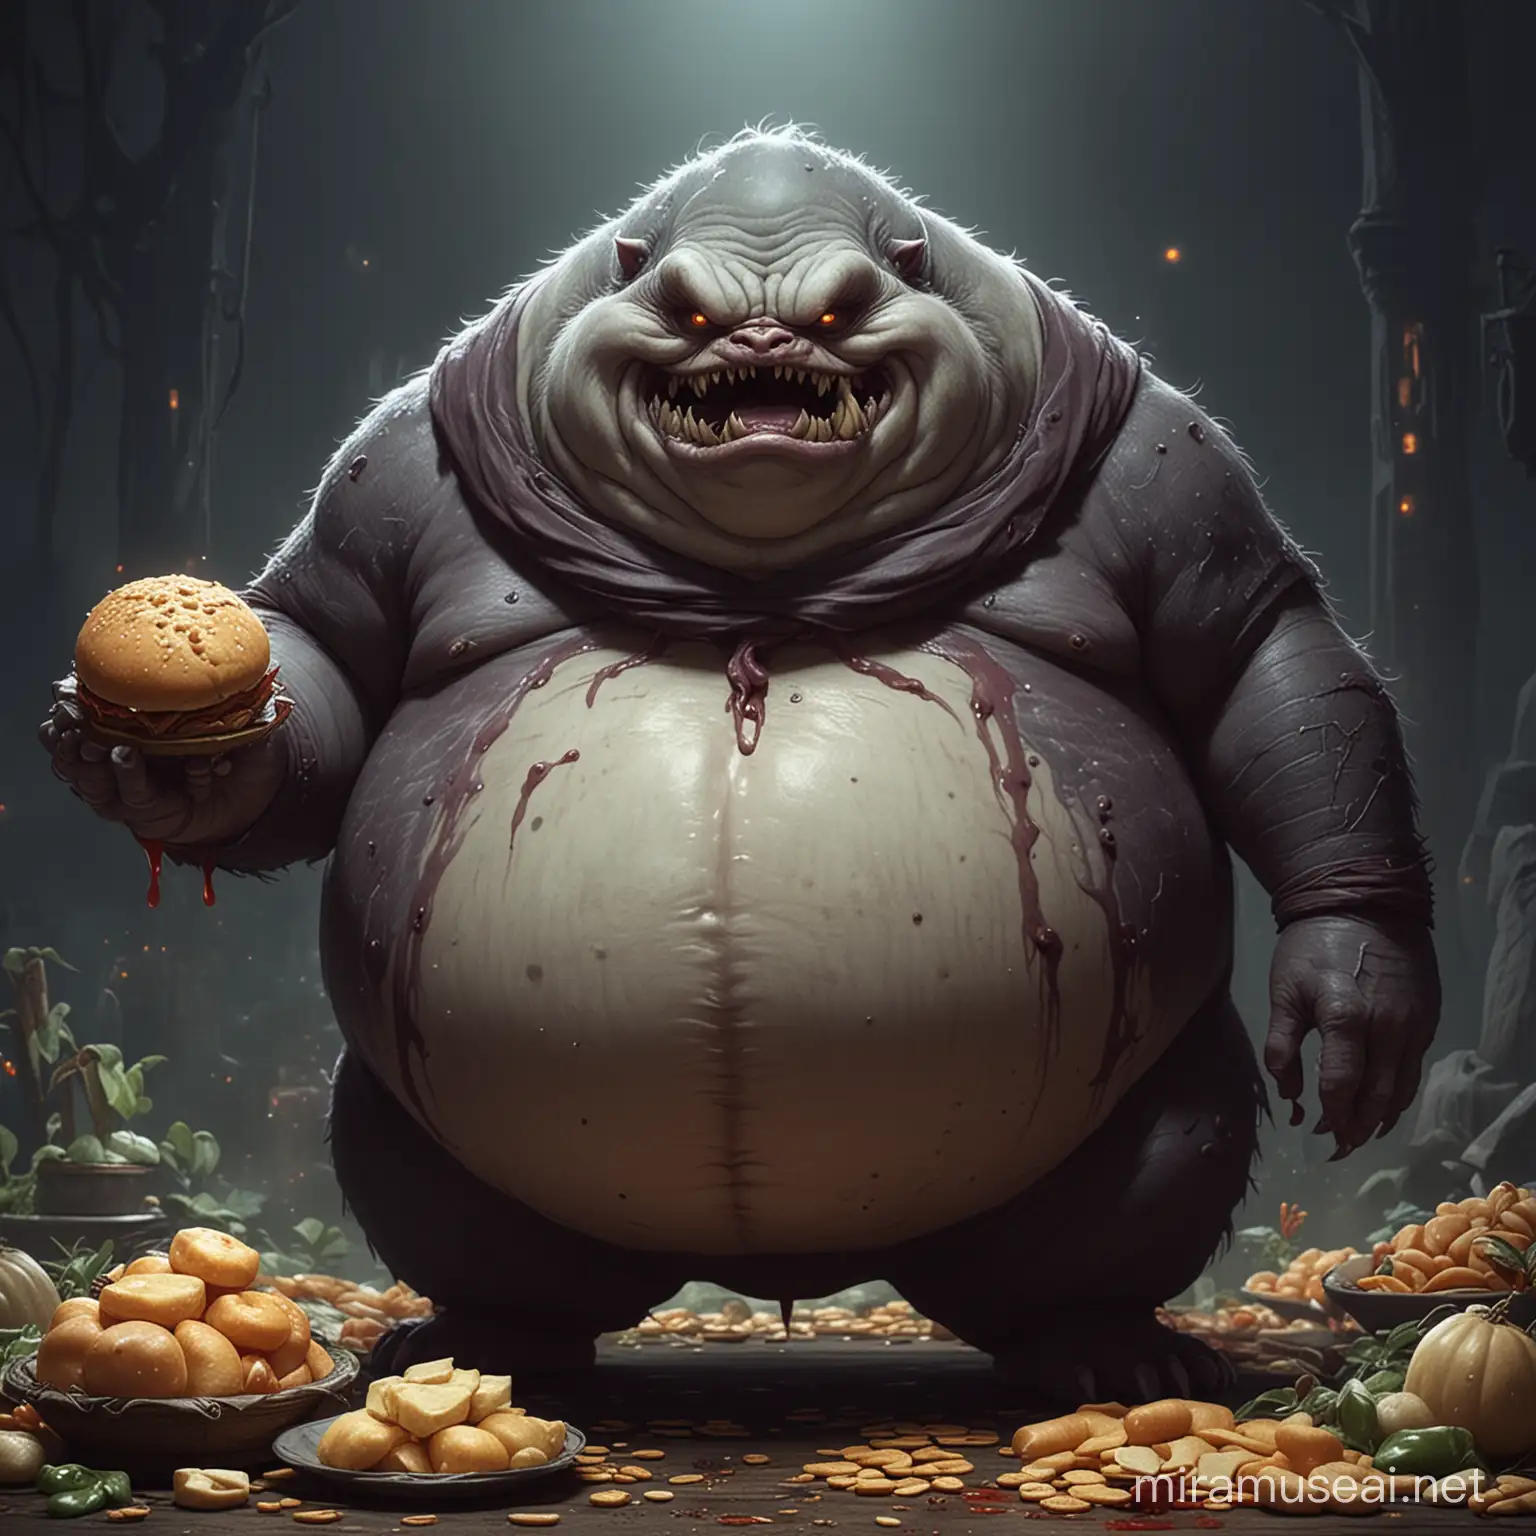 Anime Style Evil Fat Creature Fantasy Tale Hunger Controller